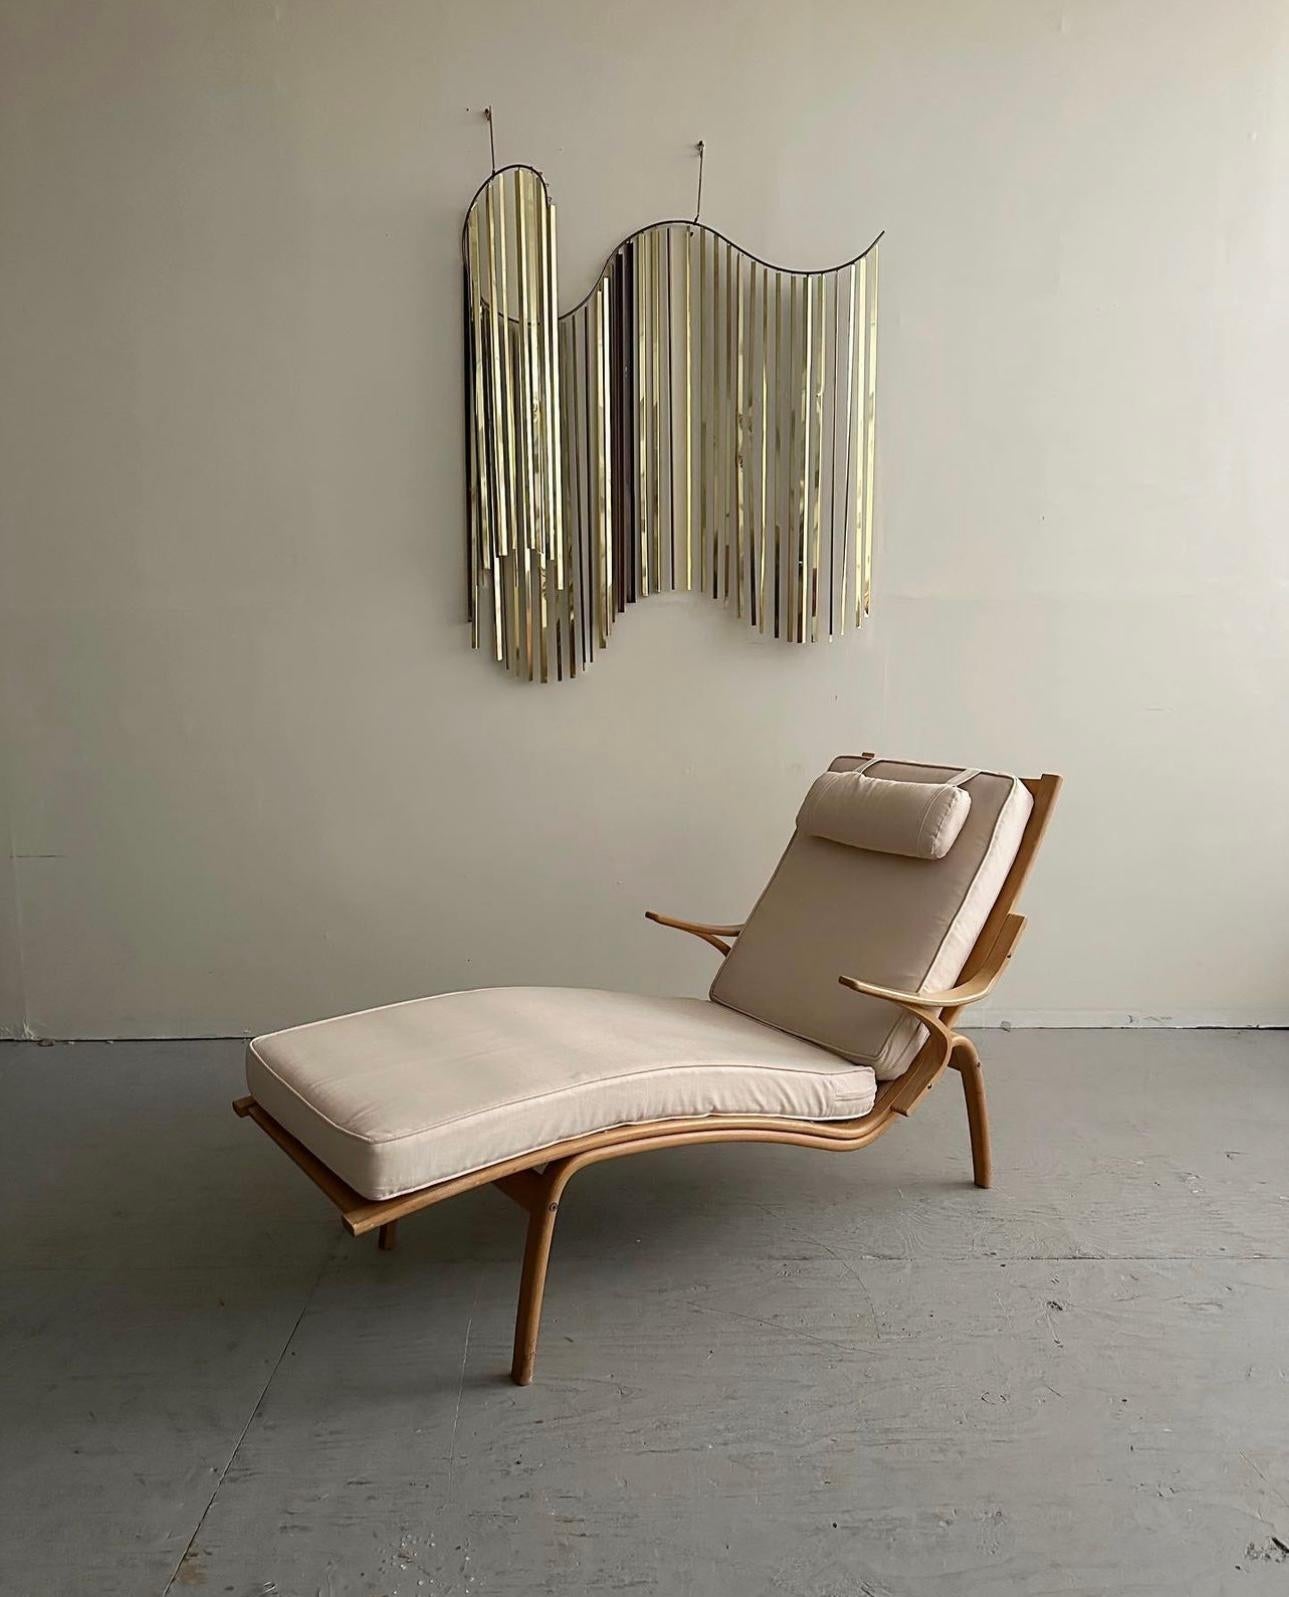 Mid-Century Modern Bentwood Chaise Lounge Designed by Alvar Aalto For Artek. This bentwood chaise lounge is made of solid birch wood and features two removable off white seat cushions and a matching adjustable headrest. Made in Sweden, Circa 1960s.